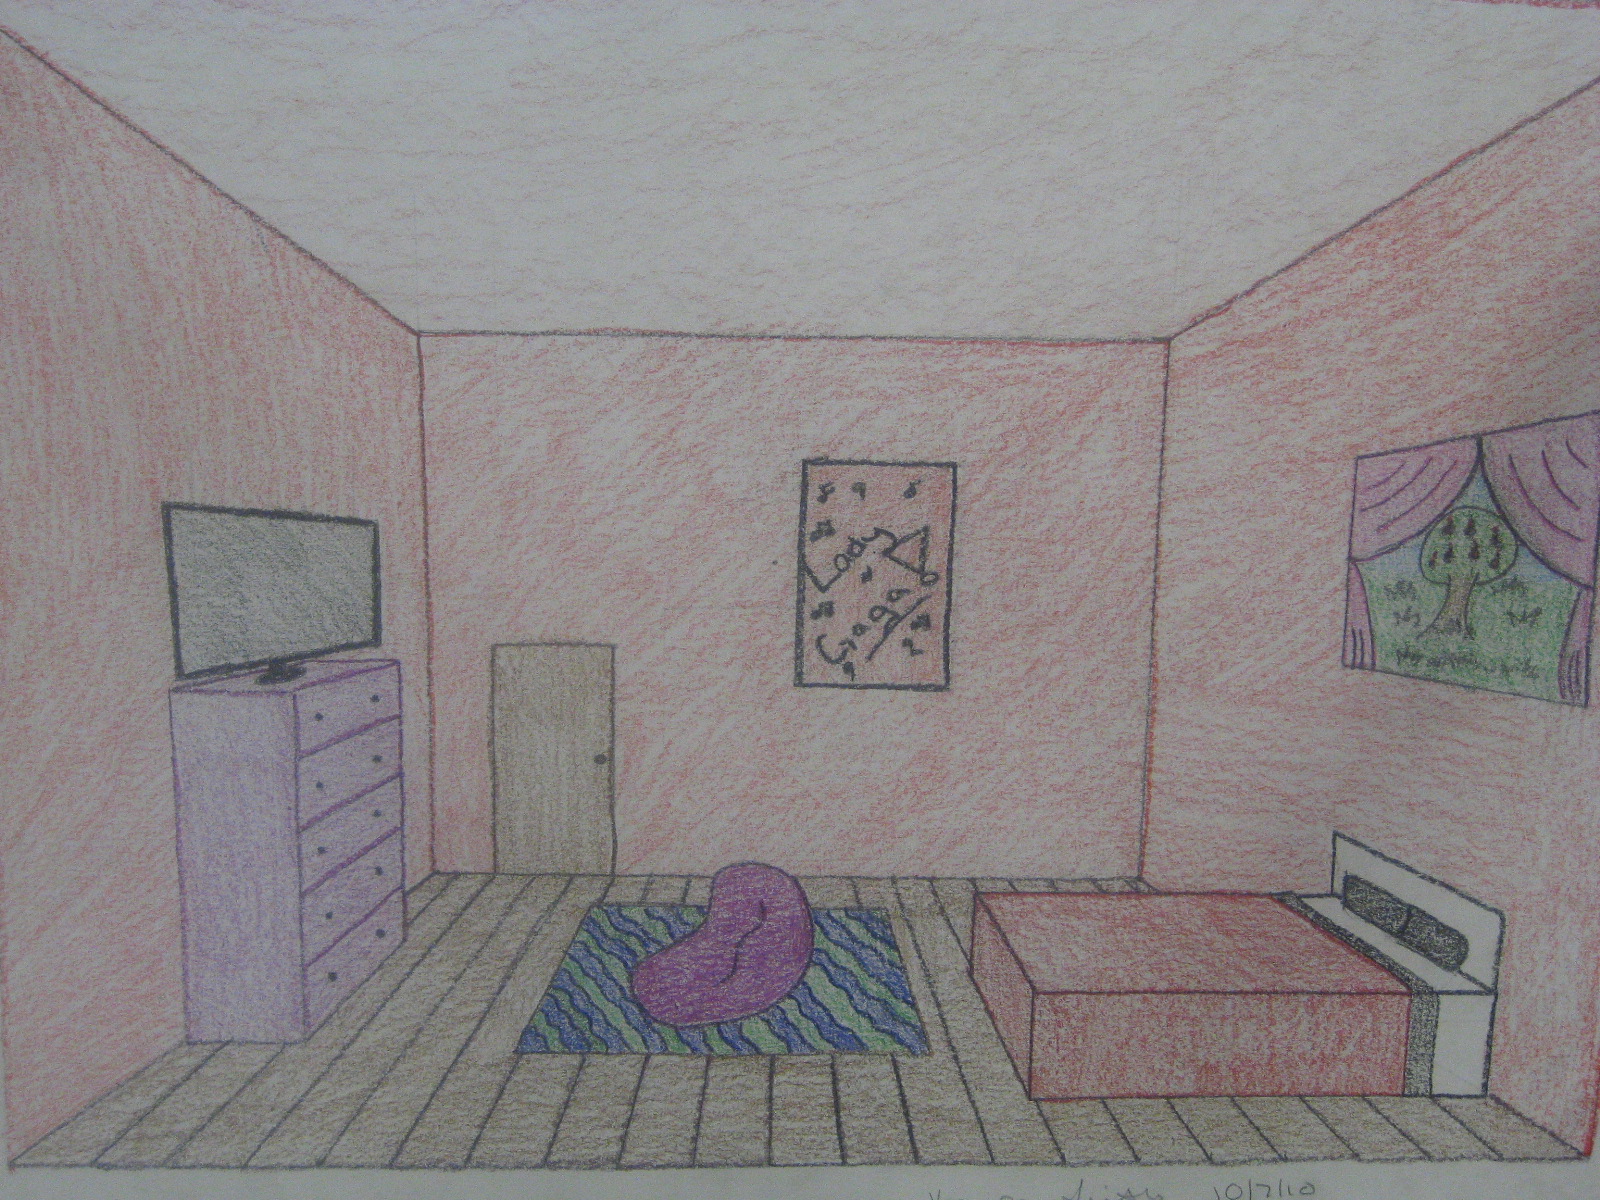 Here are some of the rooms the students have drawn: title=